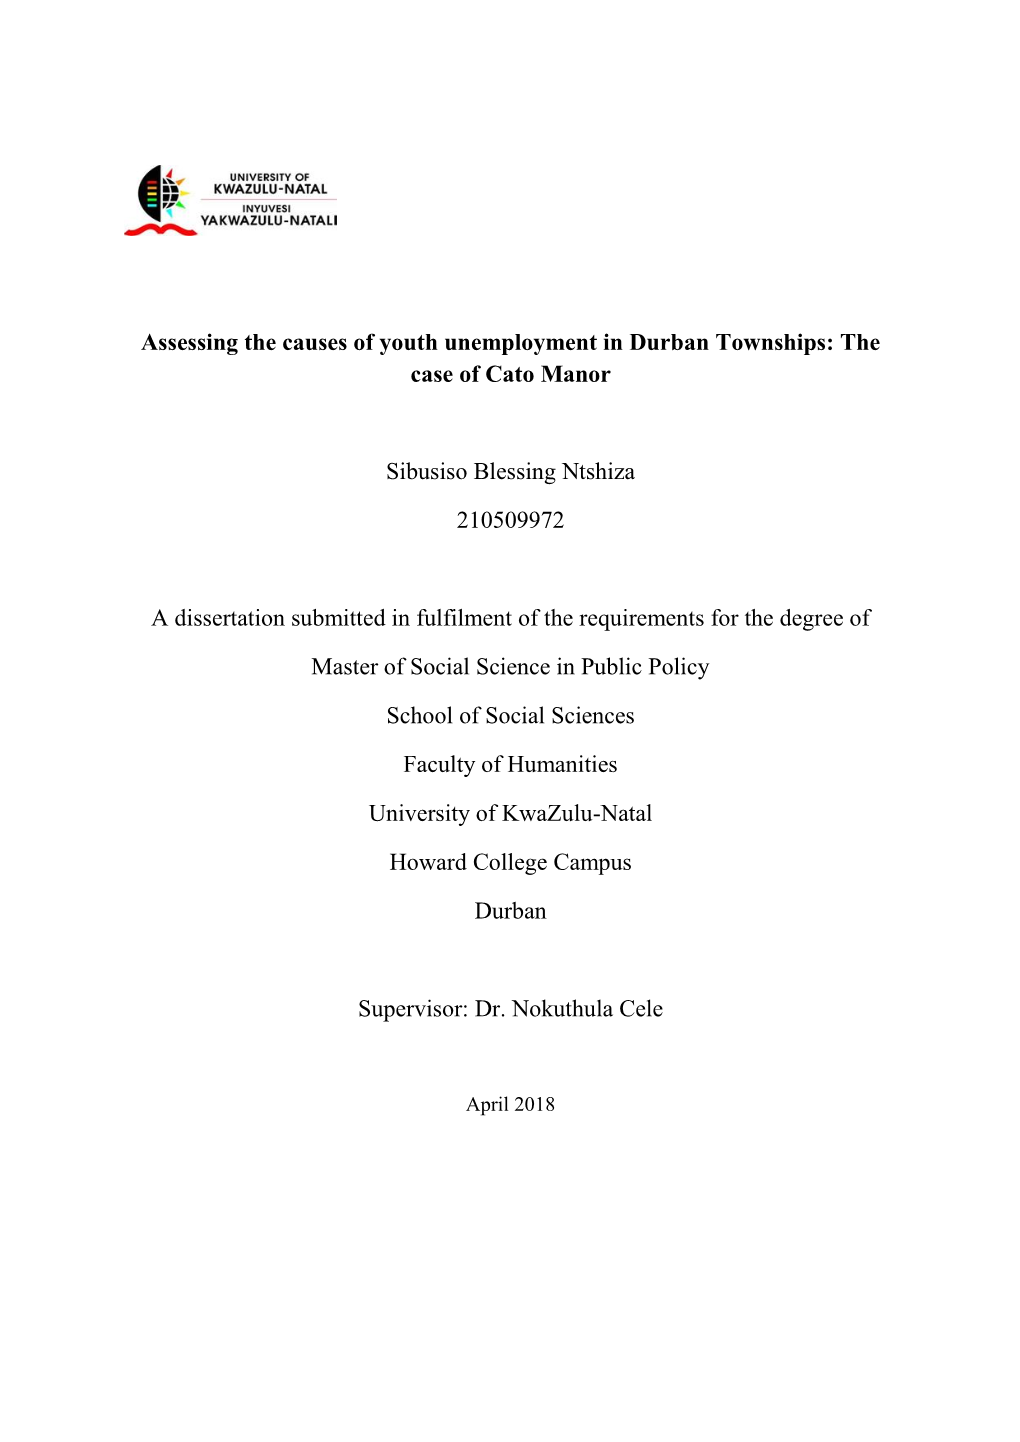 Assessing the Causes of Youth Unemployment in Durban Townships: the Case of Cato Manor